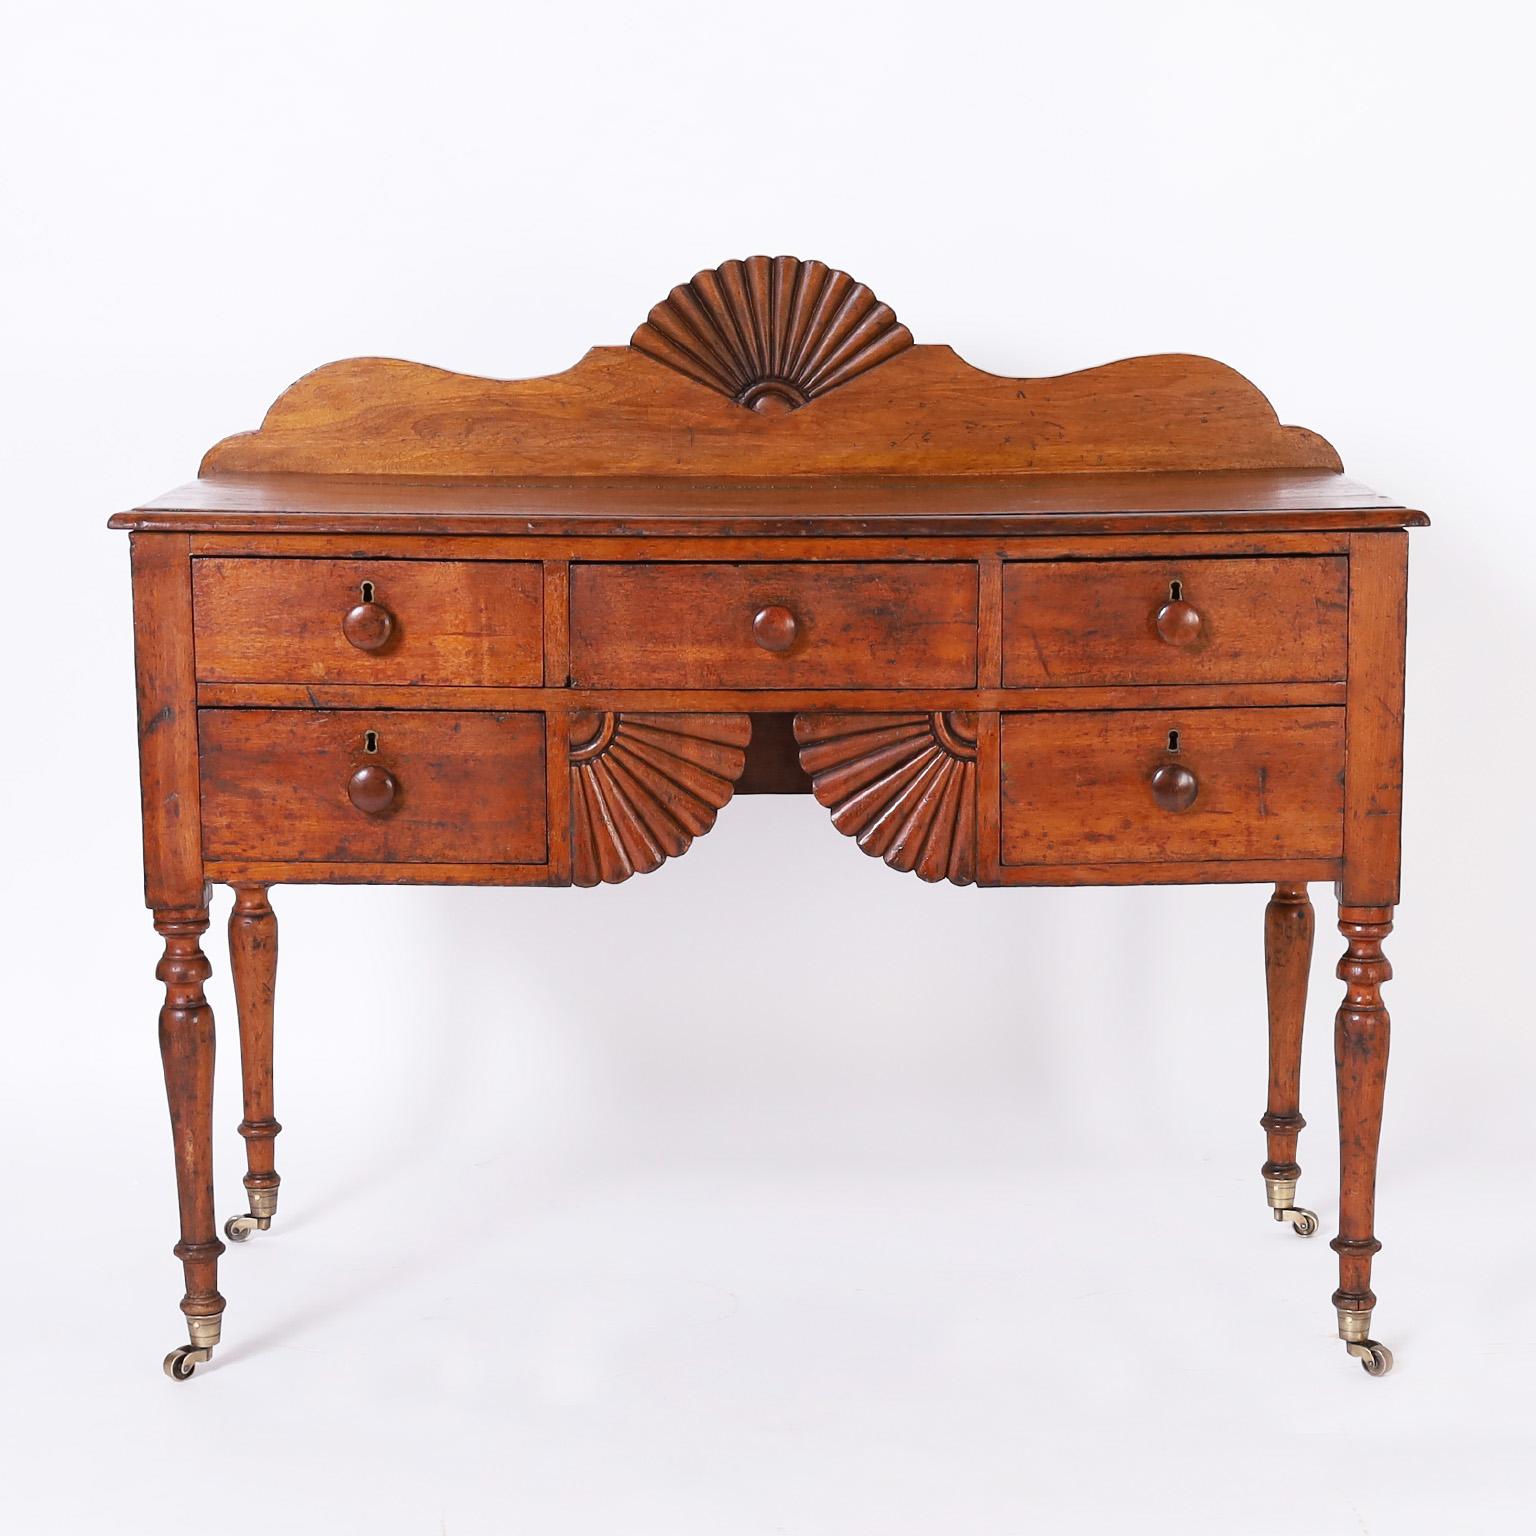 Charming early 19th century server handcrafted in mahogany with classic fan carvings on the backsplash and case front, five drawers and elegant turned legs on brass casters.